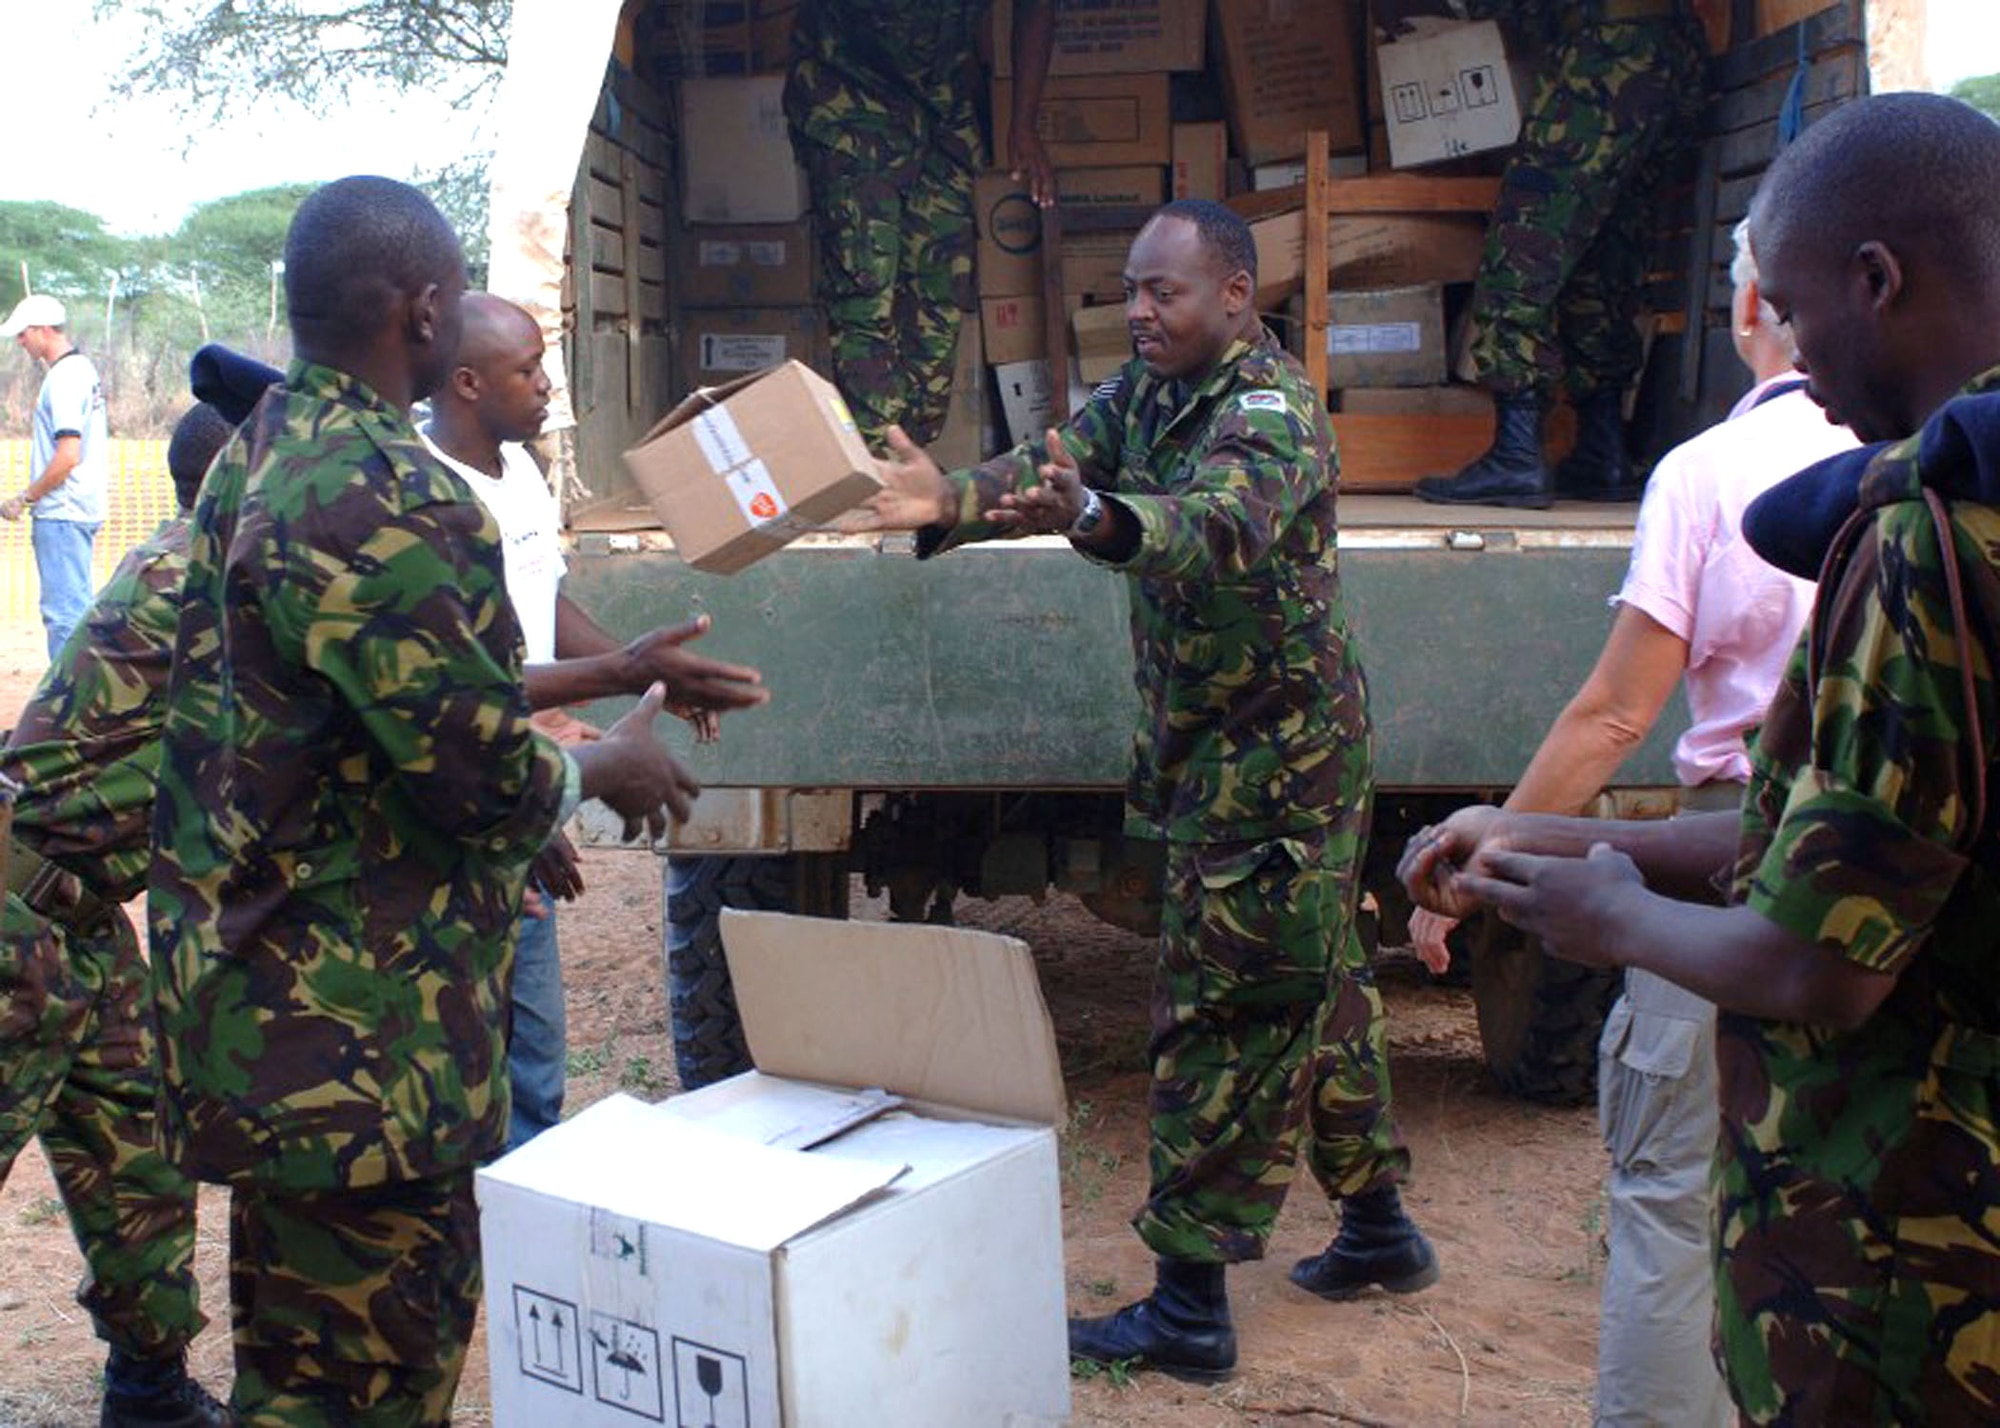 Kenyan department of defense servicemembers unload medical supplies during a Combined Joint Task Force - Horn of Africa Medical Civic Action Program in May in Kenya. CJTF-HOA servicemembers conducted the MEDCAP in the villages of Shimbir and Balich through a partnership with the Kenyan department of defense, which provided additional medical providers and logistical support. More than 1,000 people received healthcare as part of the project. (U.S. Air Force photo/Tech. Sgt. Carrie Bernard) 